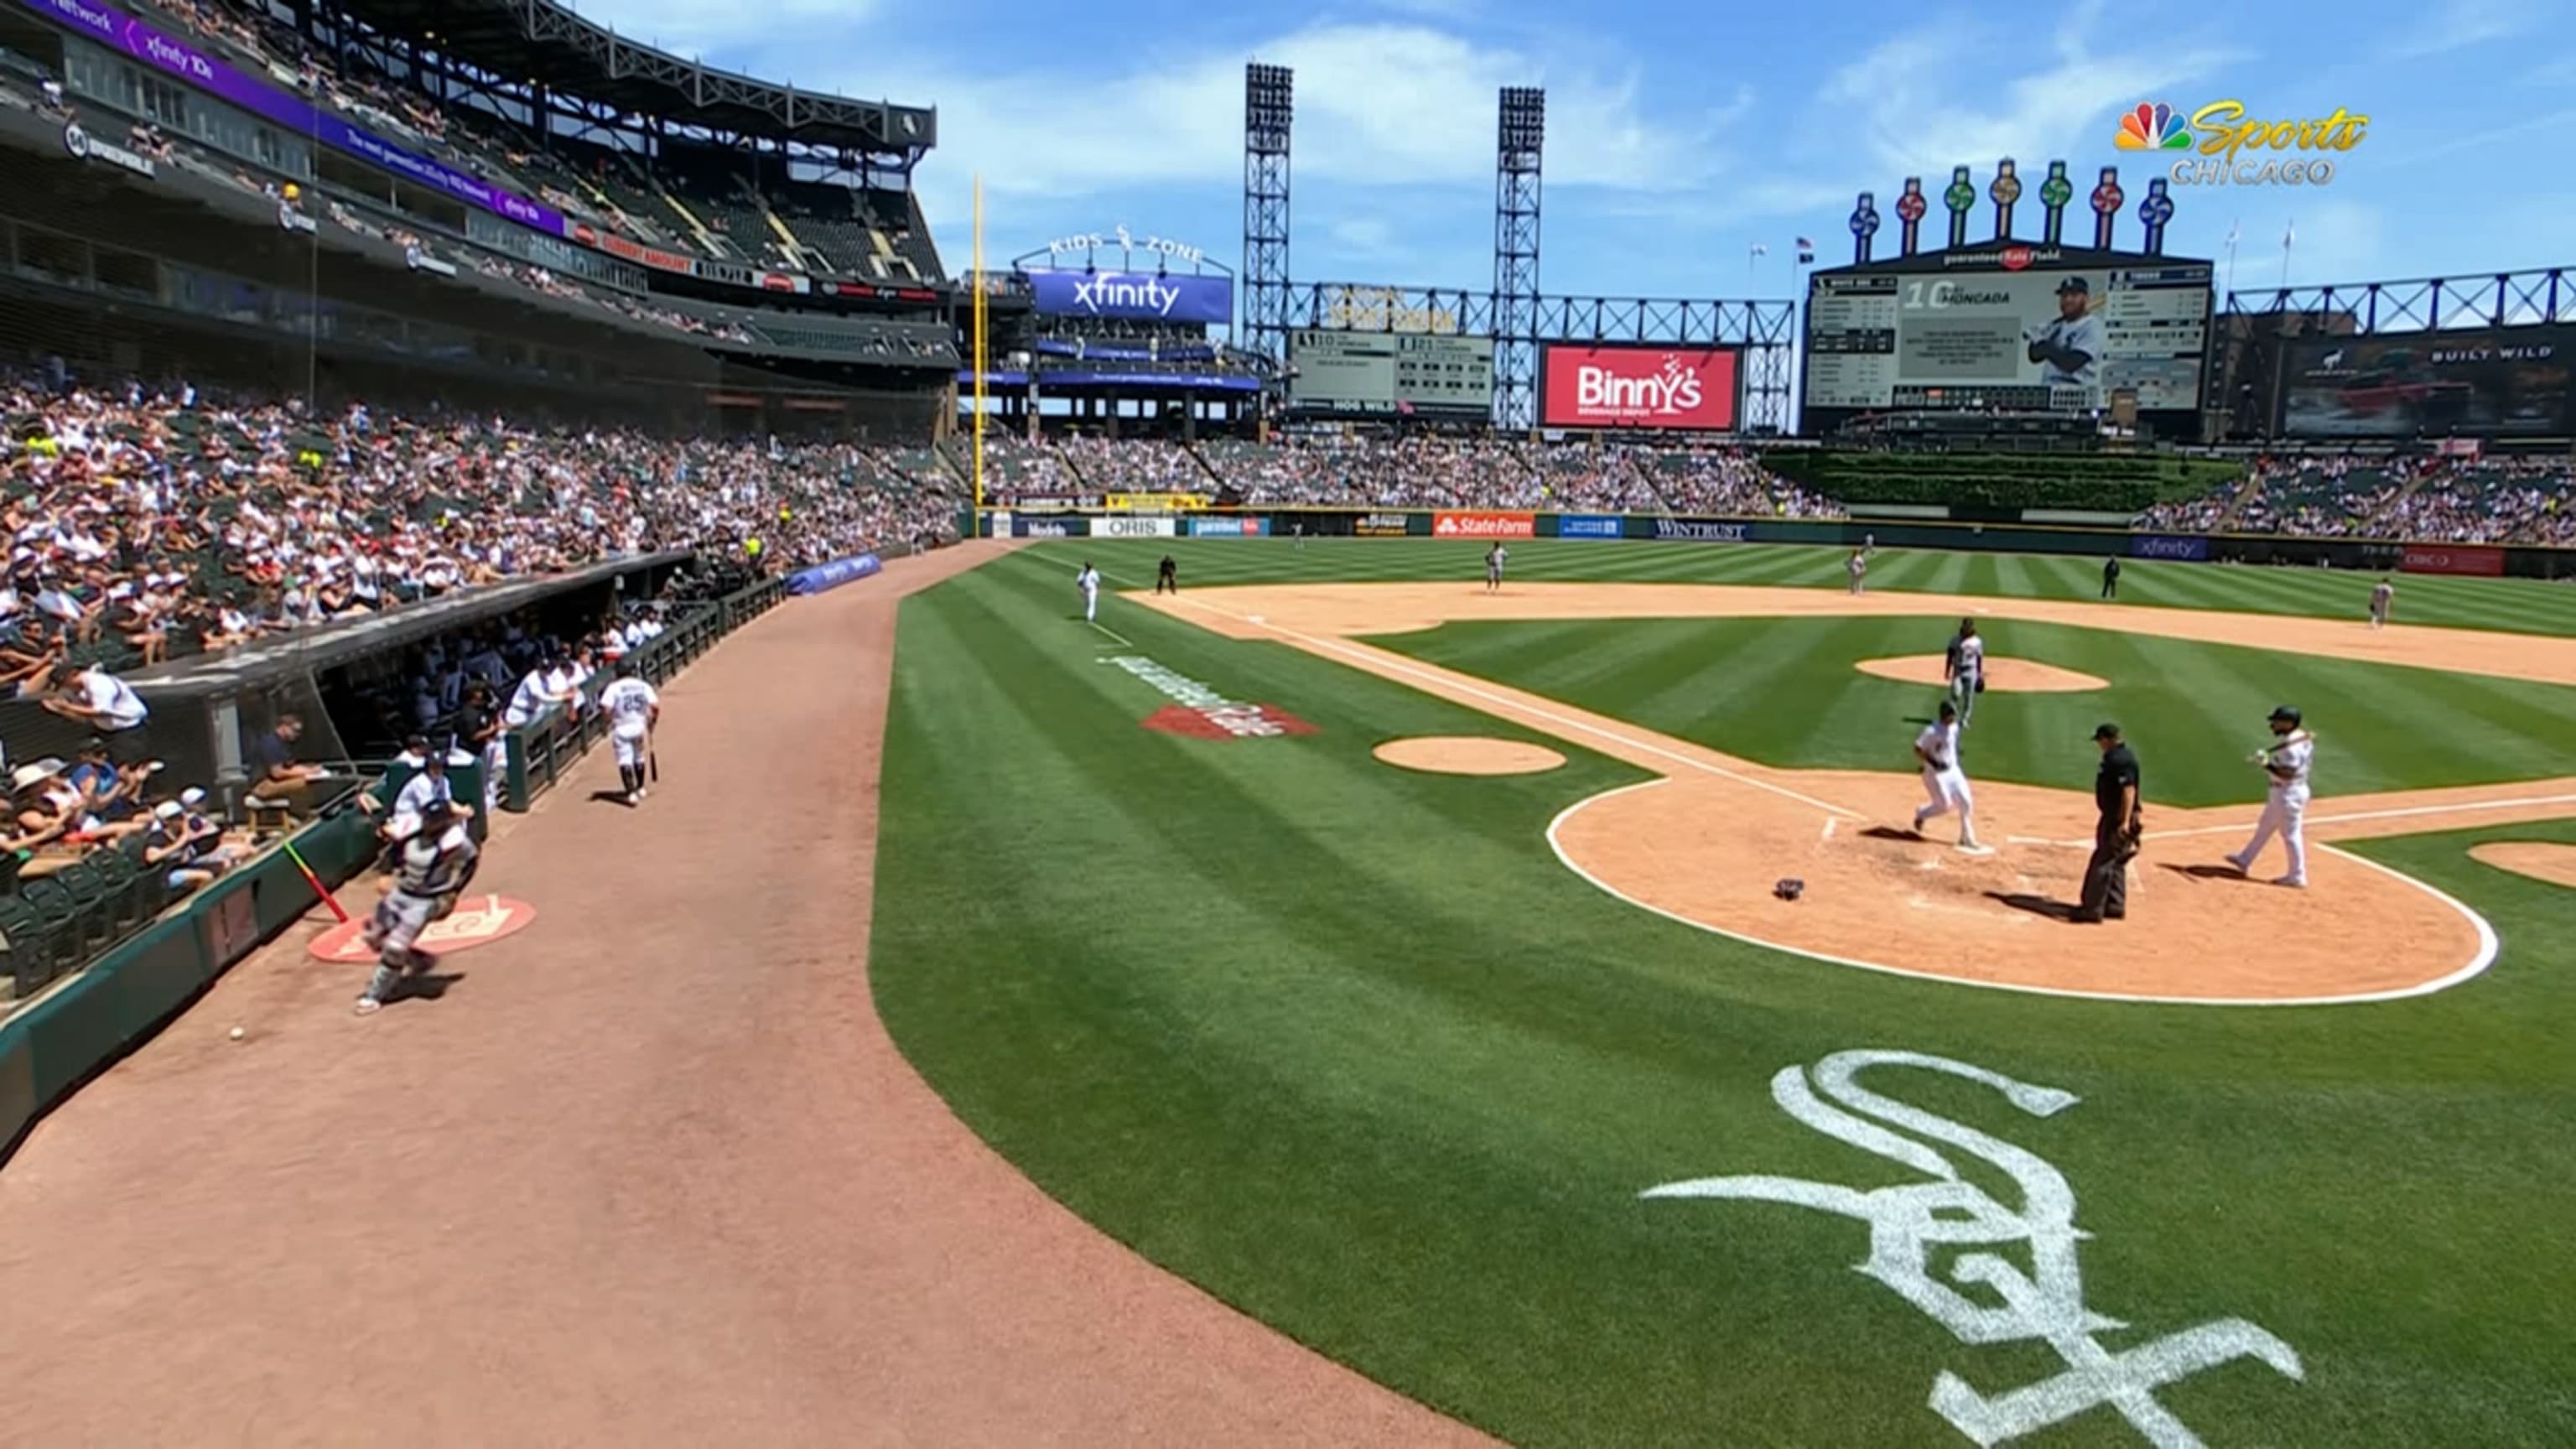 Photos: White Sox get Guaranteed Rate Field ready for the postseason